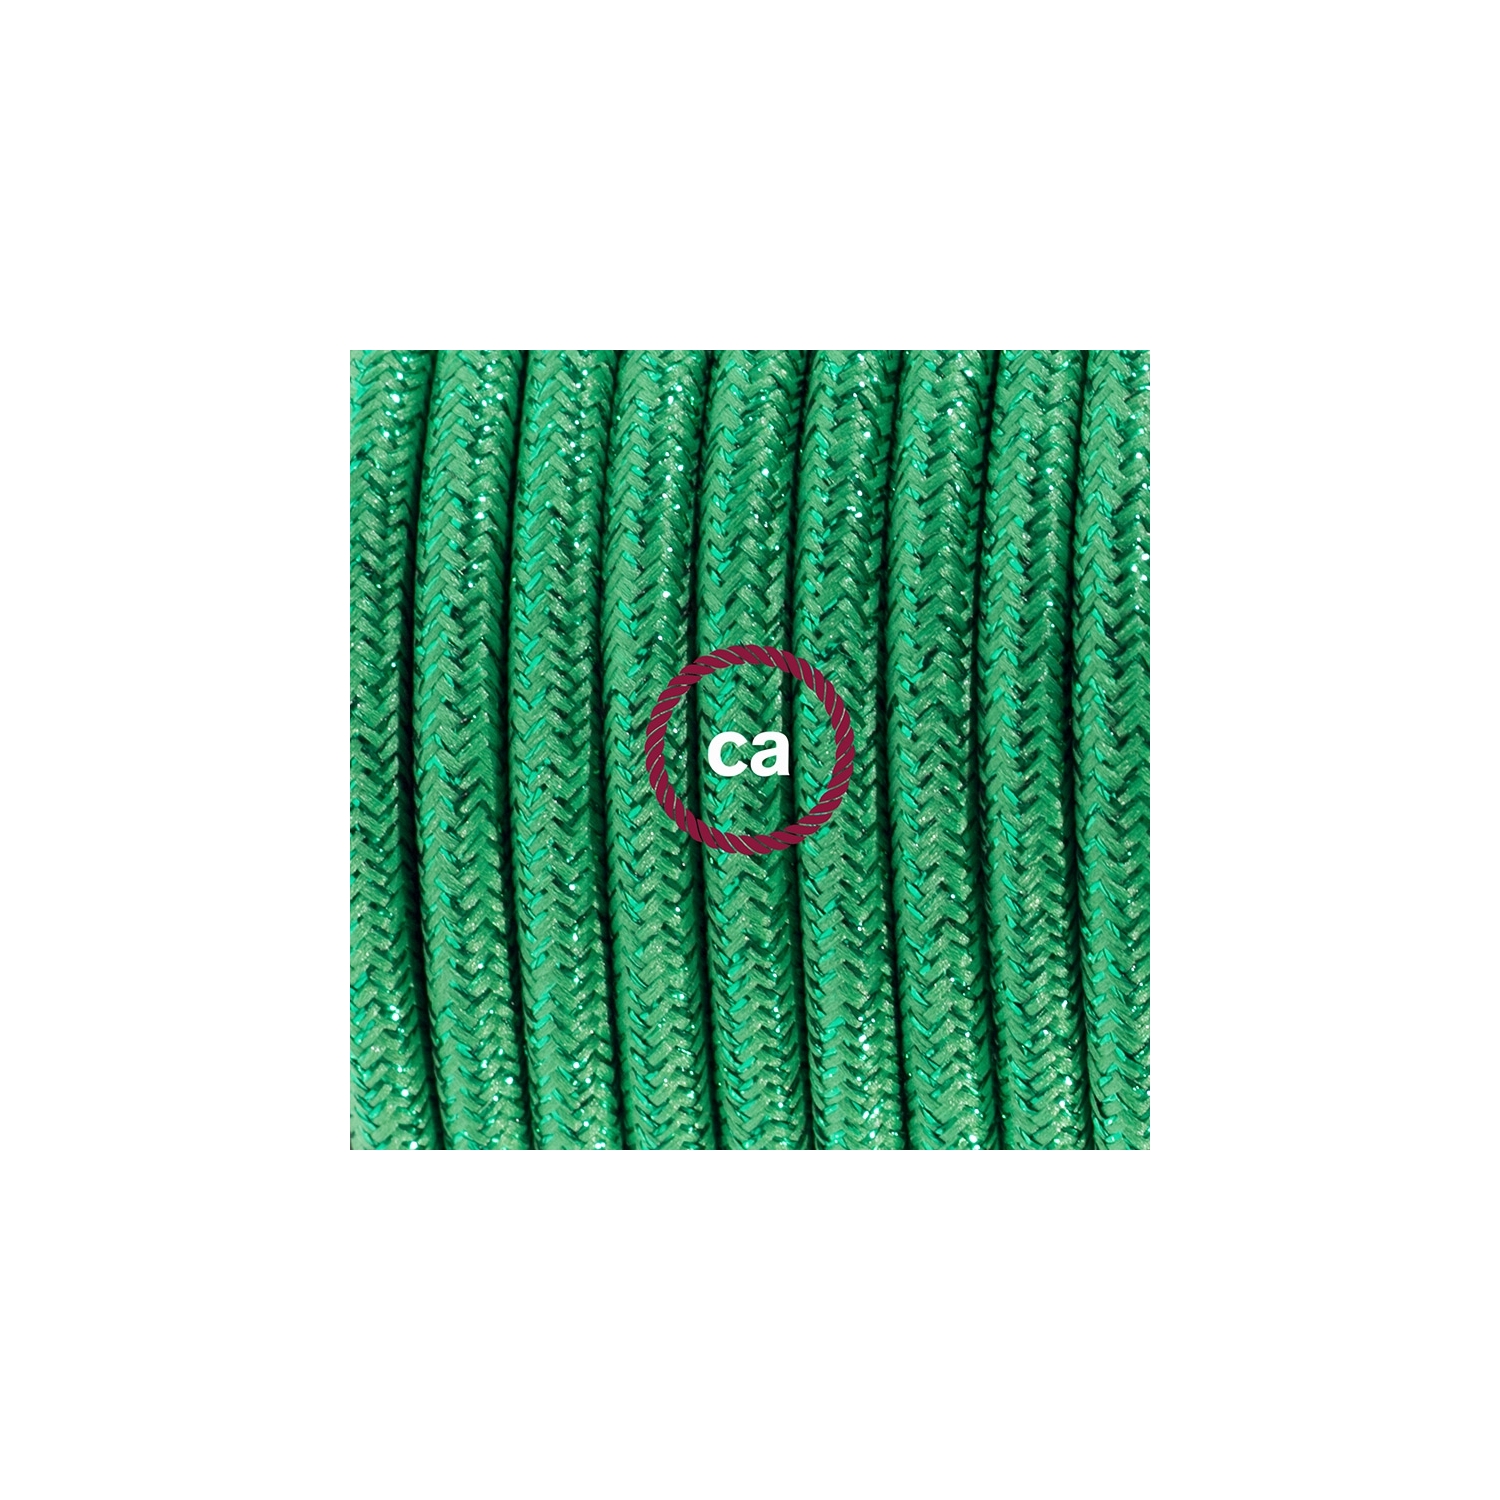 Plug-in Pendant with switch on socket | RL06 Green Glitter